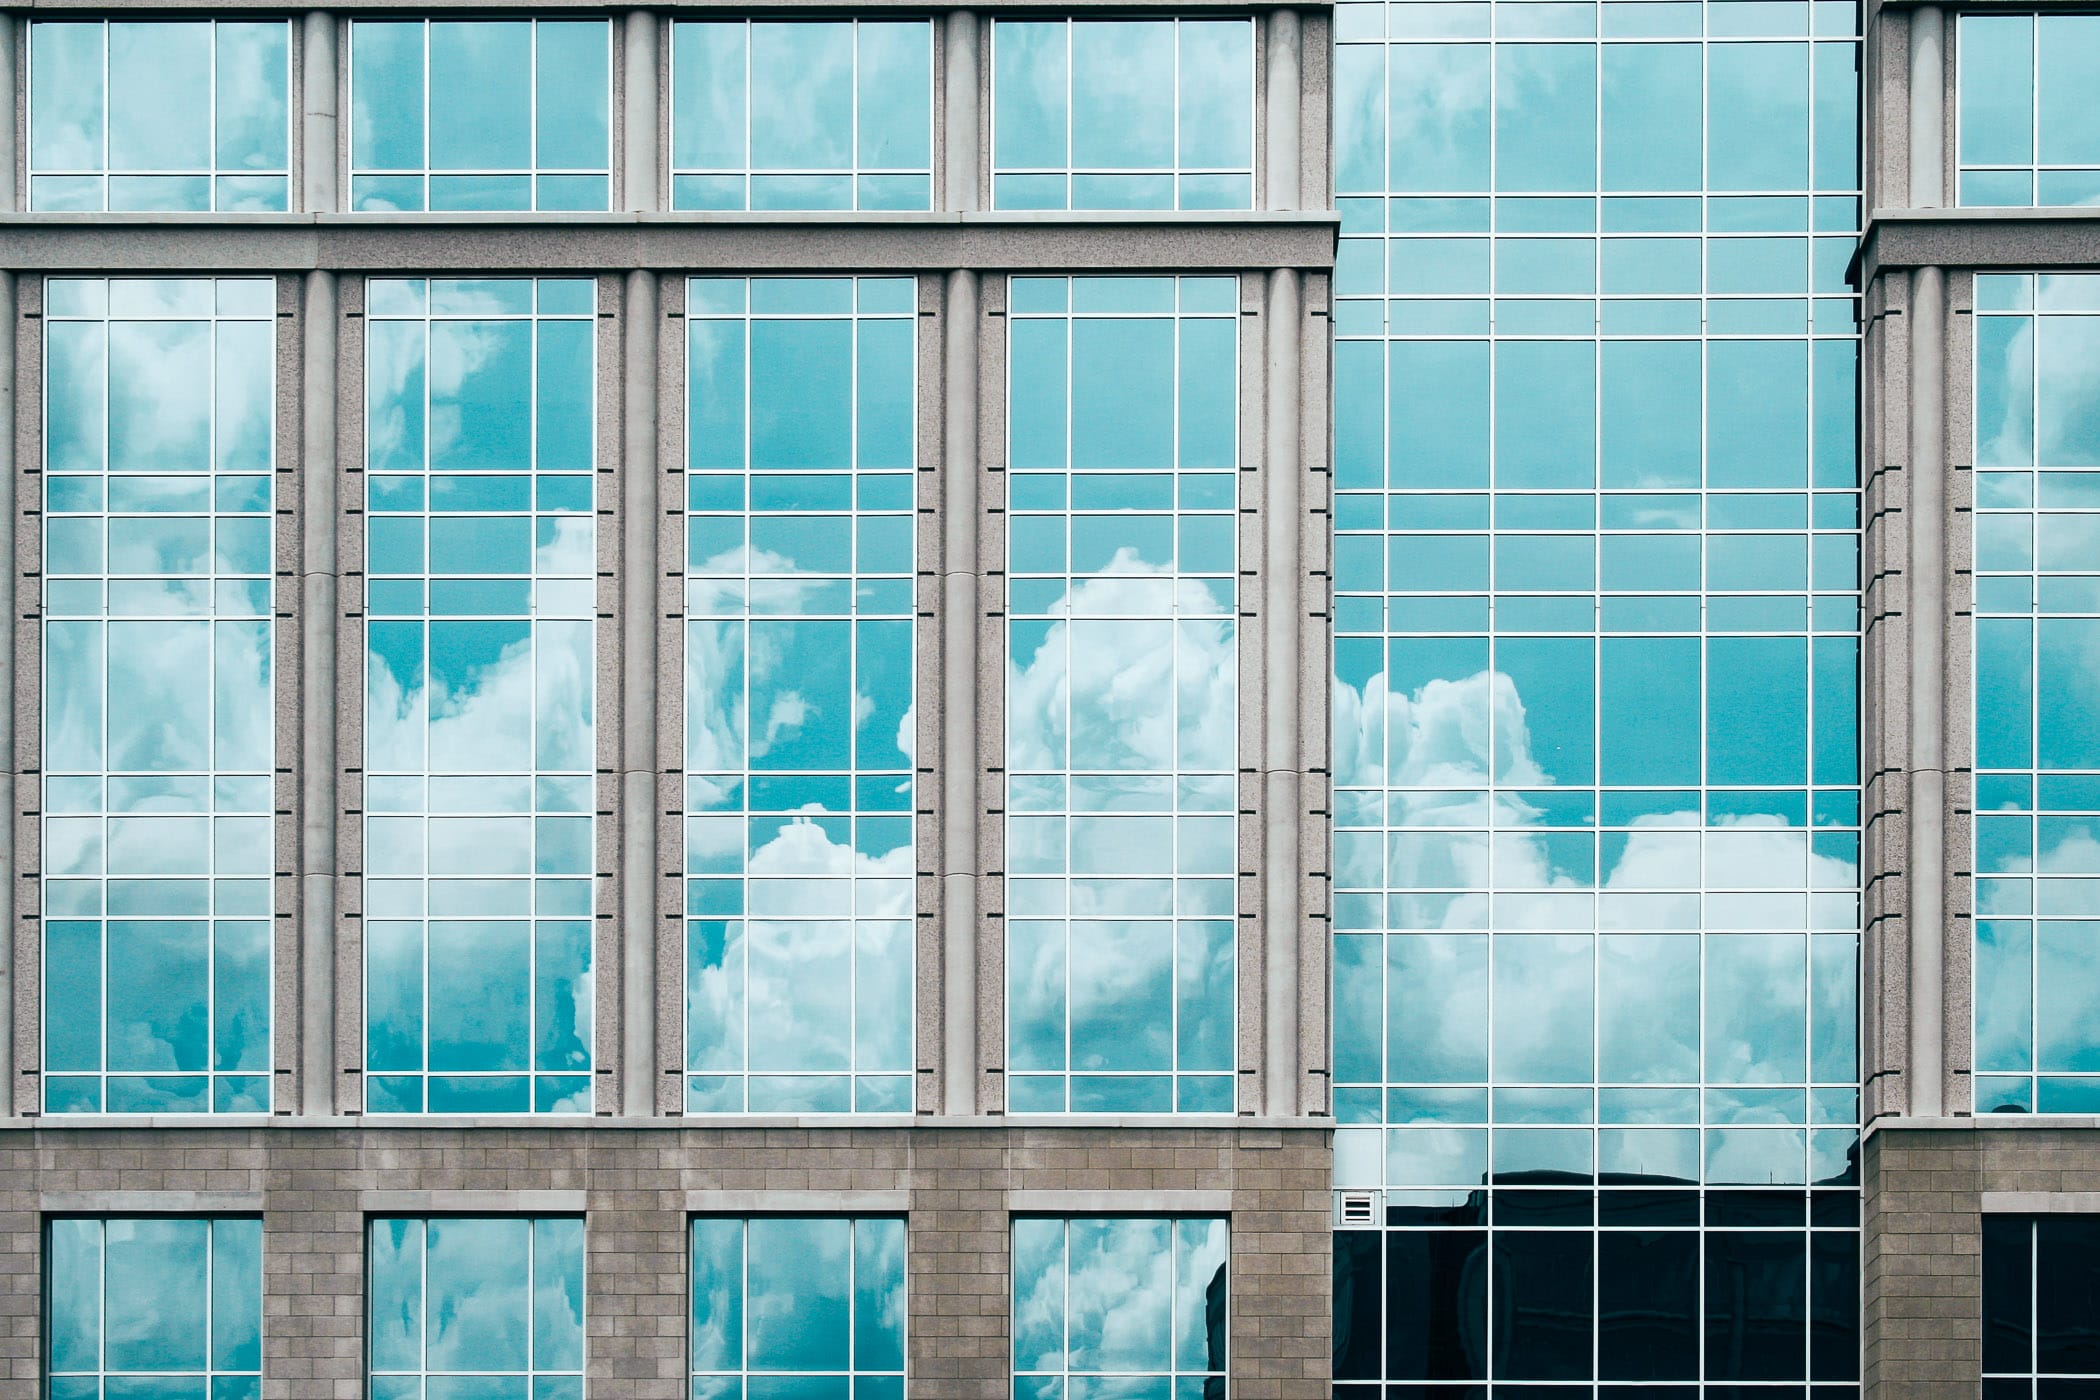 Clouds reflected in the windows of an office building in Frisco, Texas.